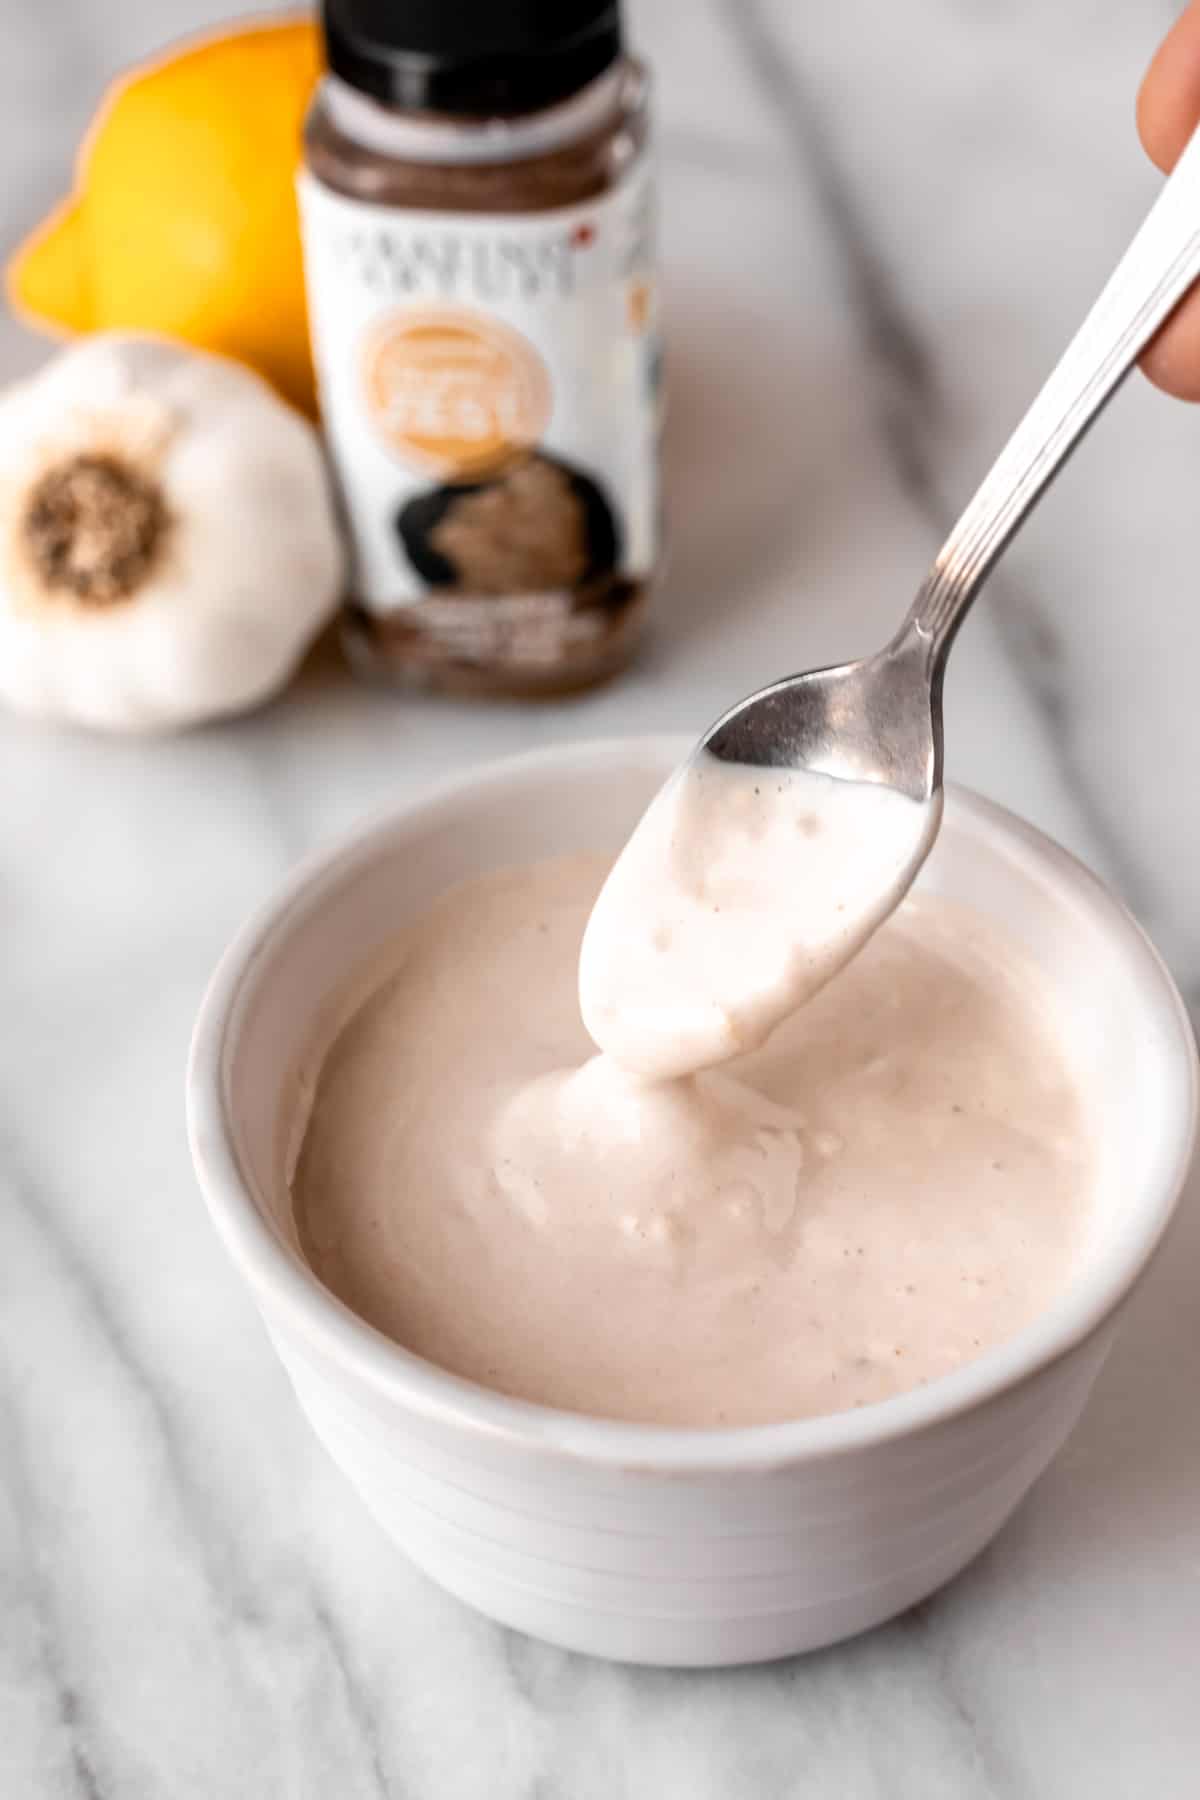 Truffle aioli in a white bowl with a small spoon lifting some up with a lemon, head of garlic, and bottle of truffle powder in the. background.